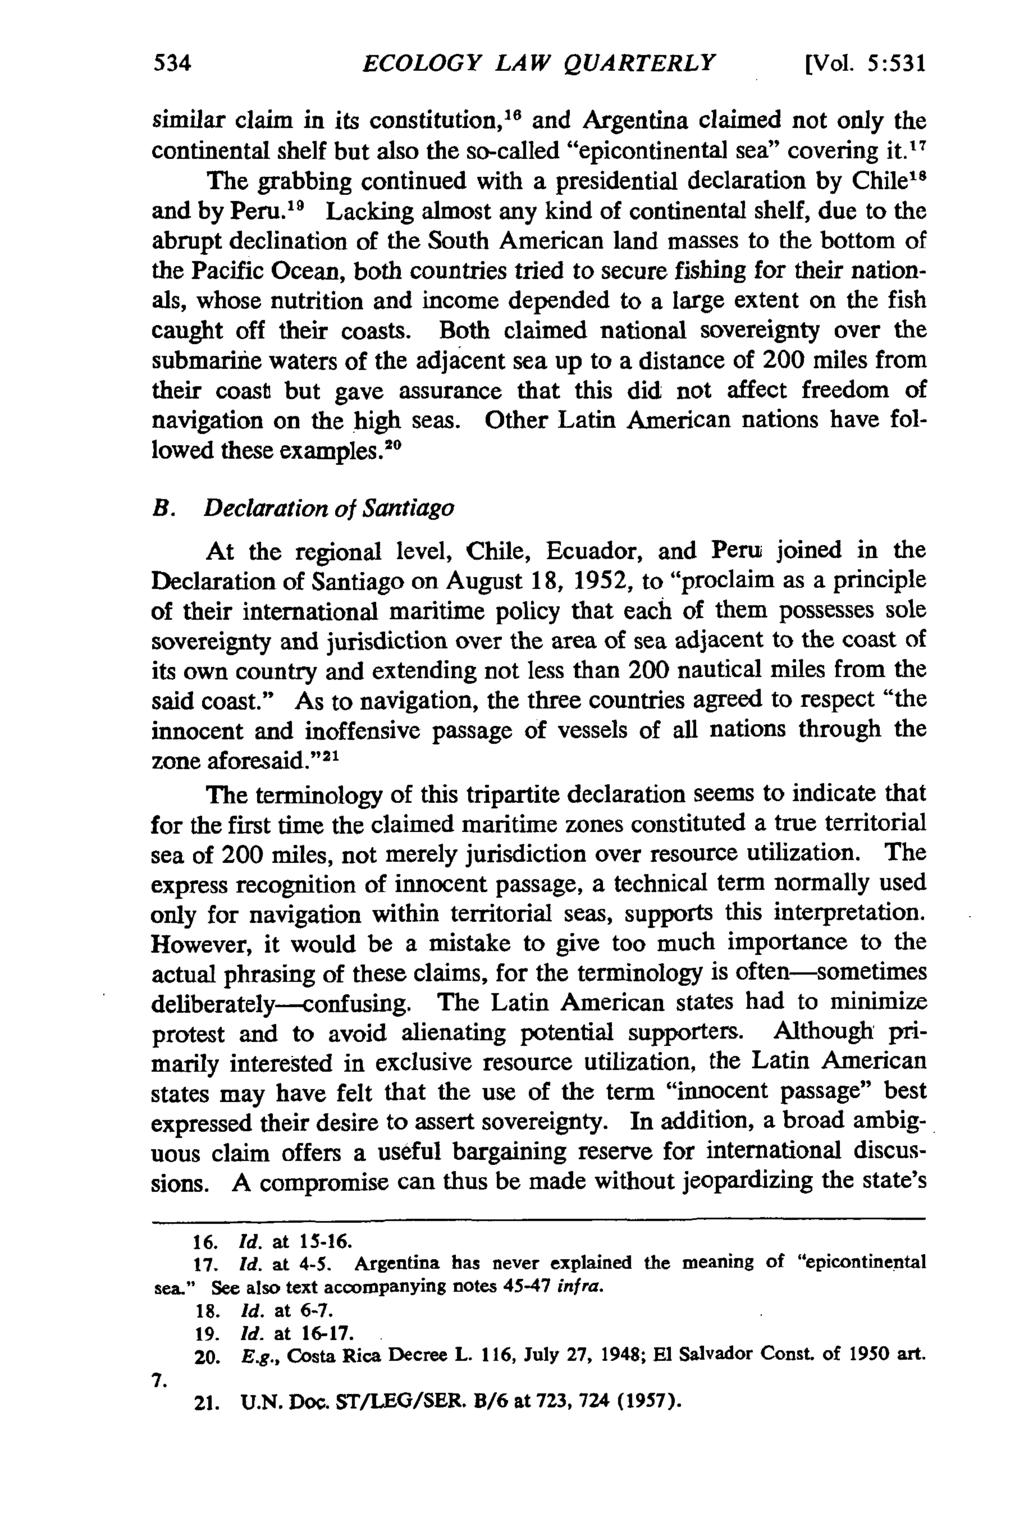 ECOLOGY LAW QUARTERLY [Vol. 5:531 similar claim in its constitution,' and Argentina claimed not only the continental shelf but also the so-called "epicontinental sea" covering it.